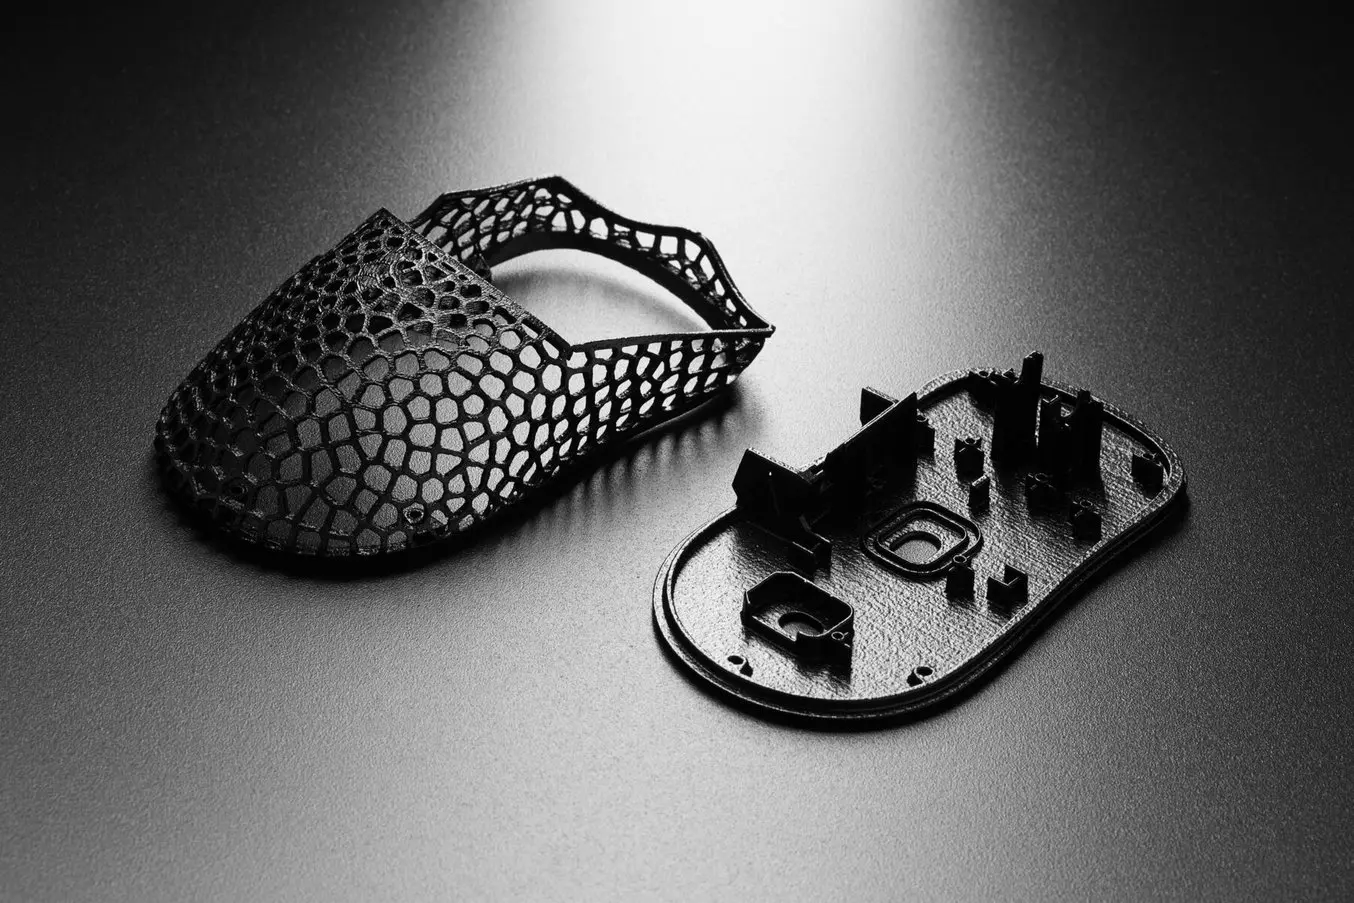 vapor smoothed SLS 3D printed computer mouse